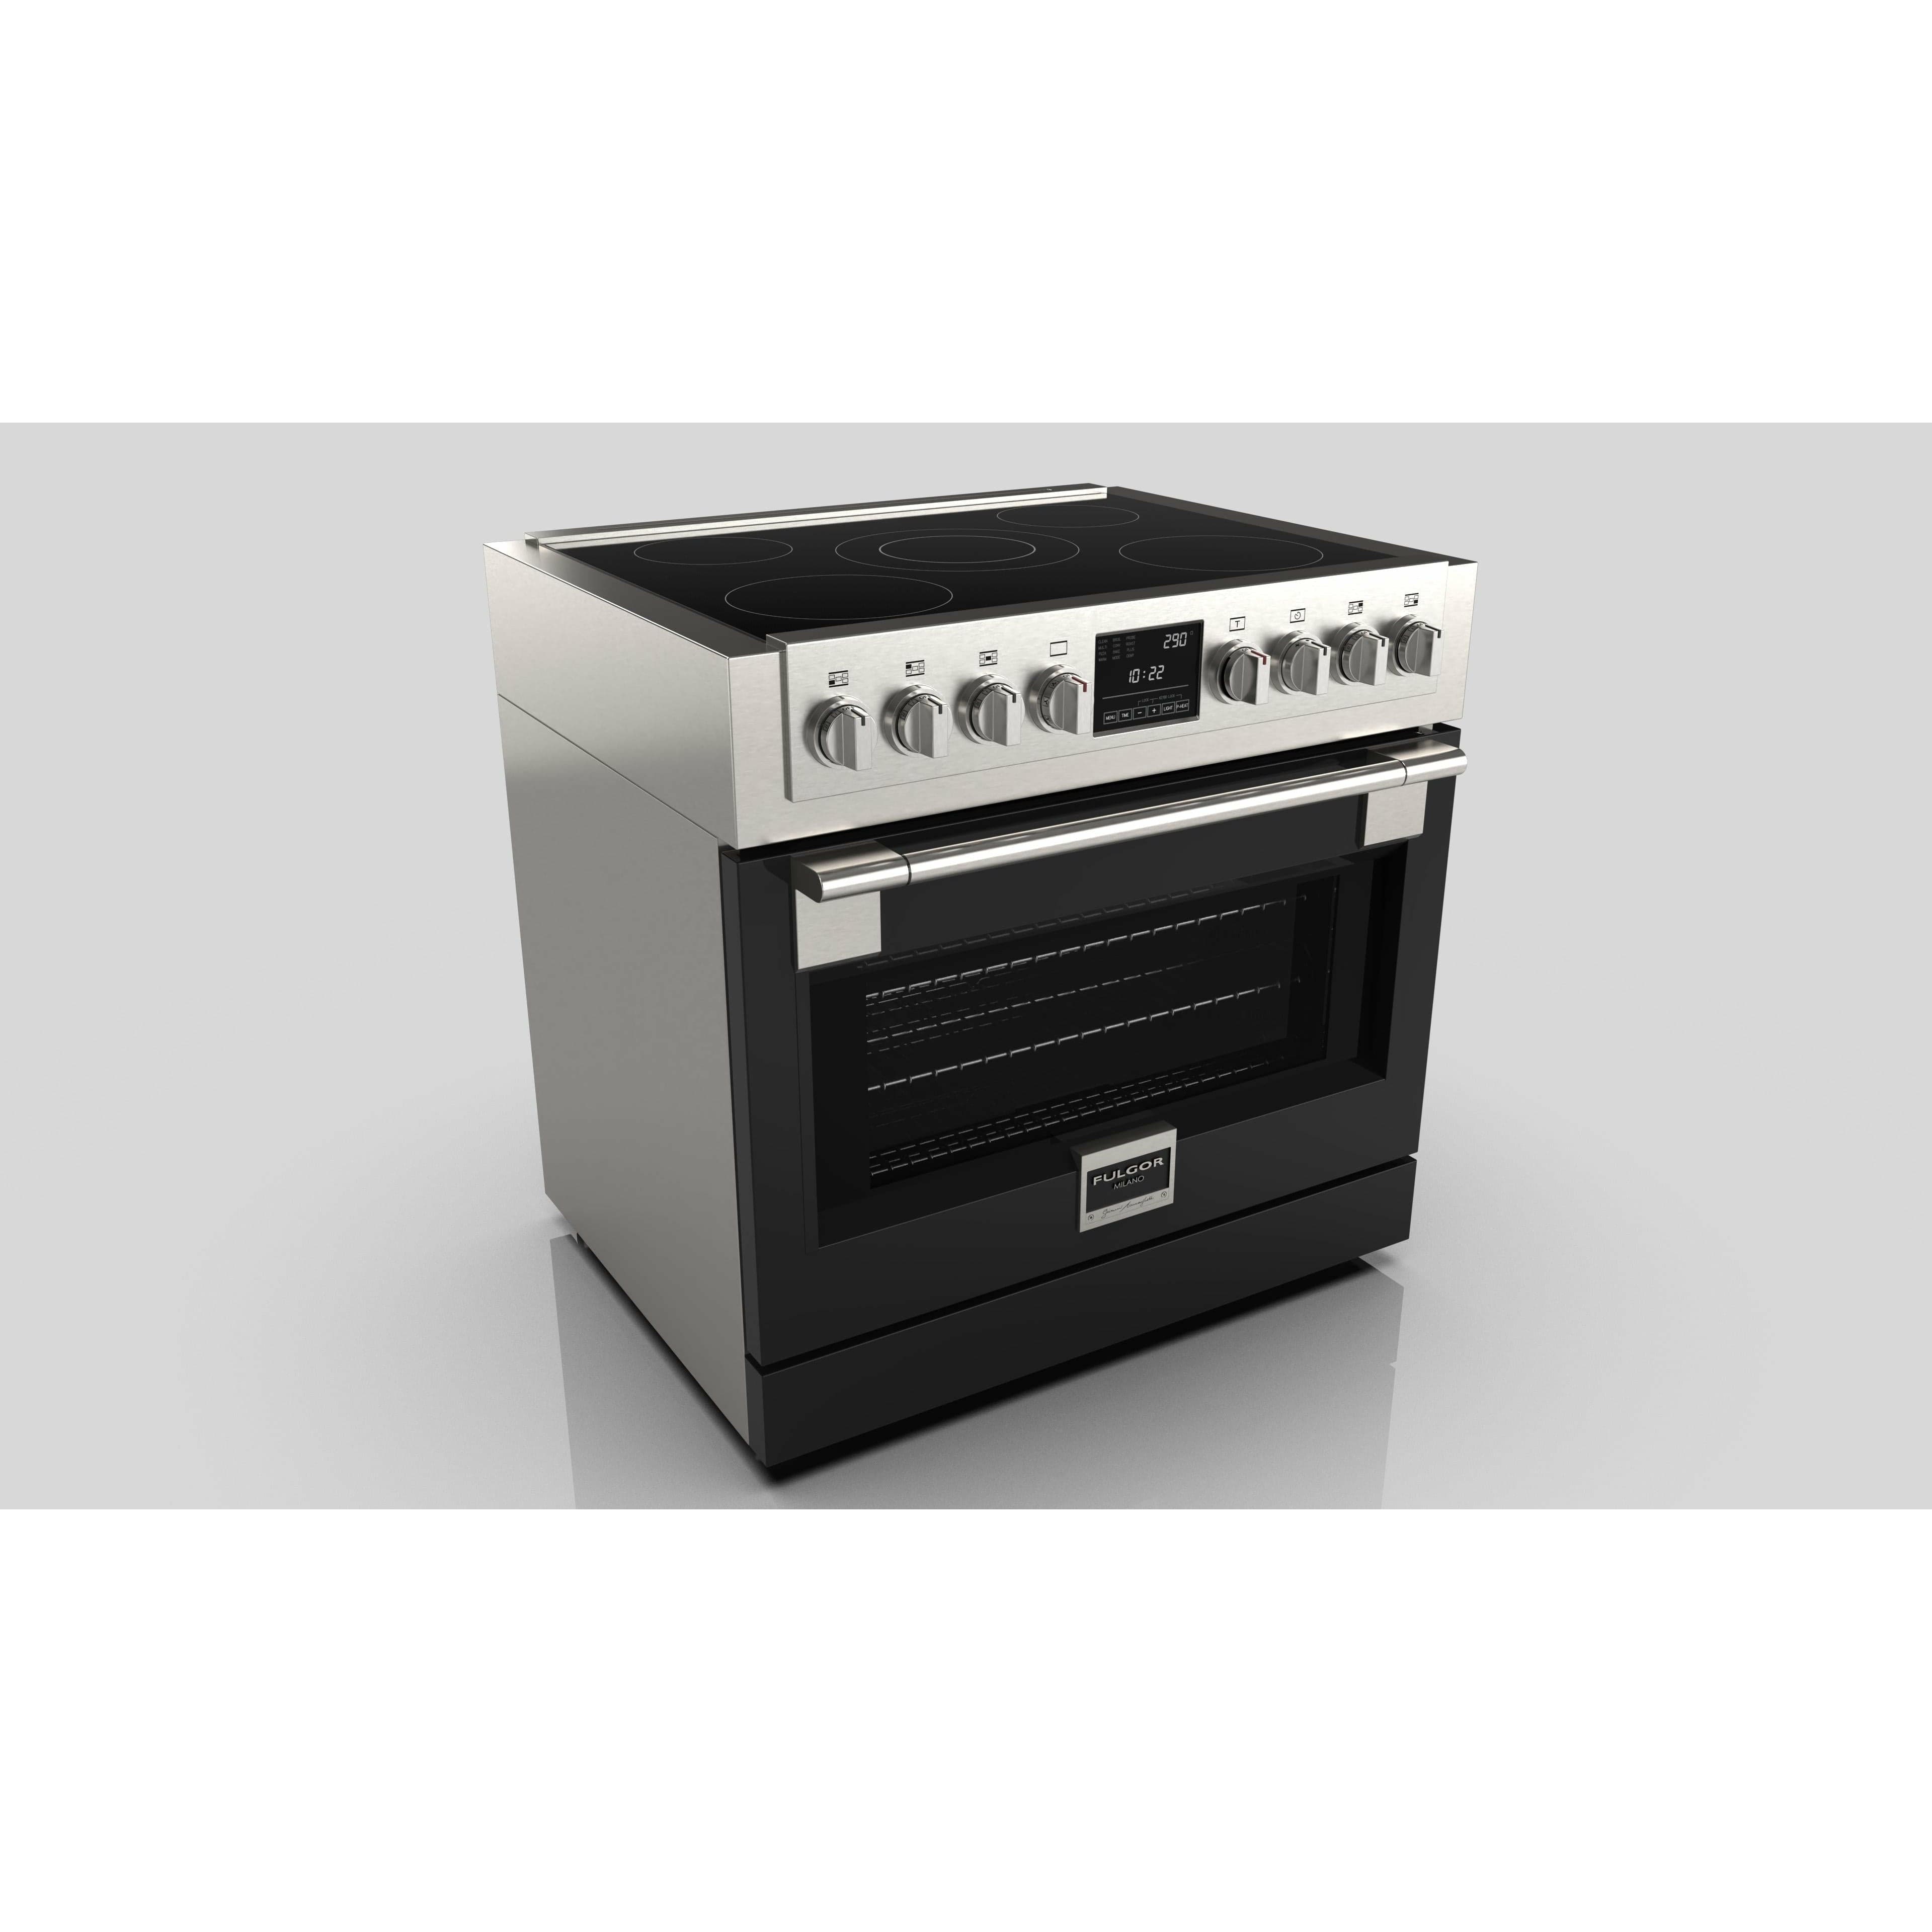 Fulgor Milano 36" Induction Freestanding Pro-Range with 5 Induction Zones, 5.7 Cu. Ft. Capacity - F6PIR365S1 Ranges Luxury Appliances Direct